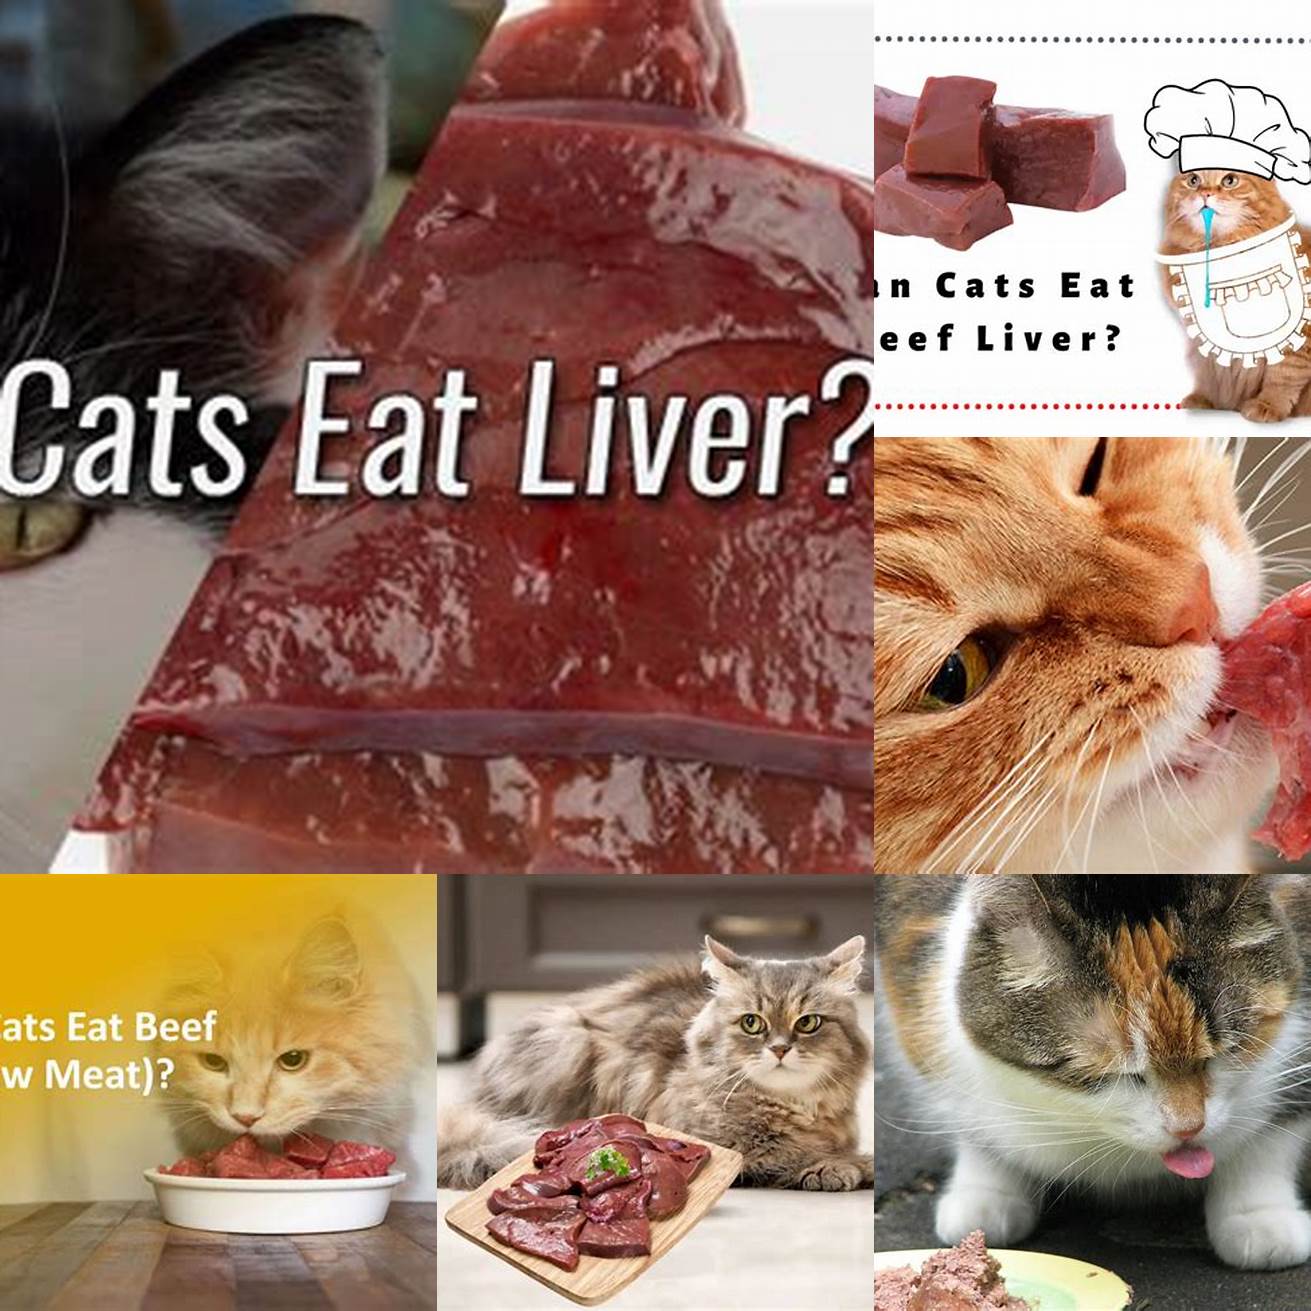 Q Can cats eat beef liver